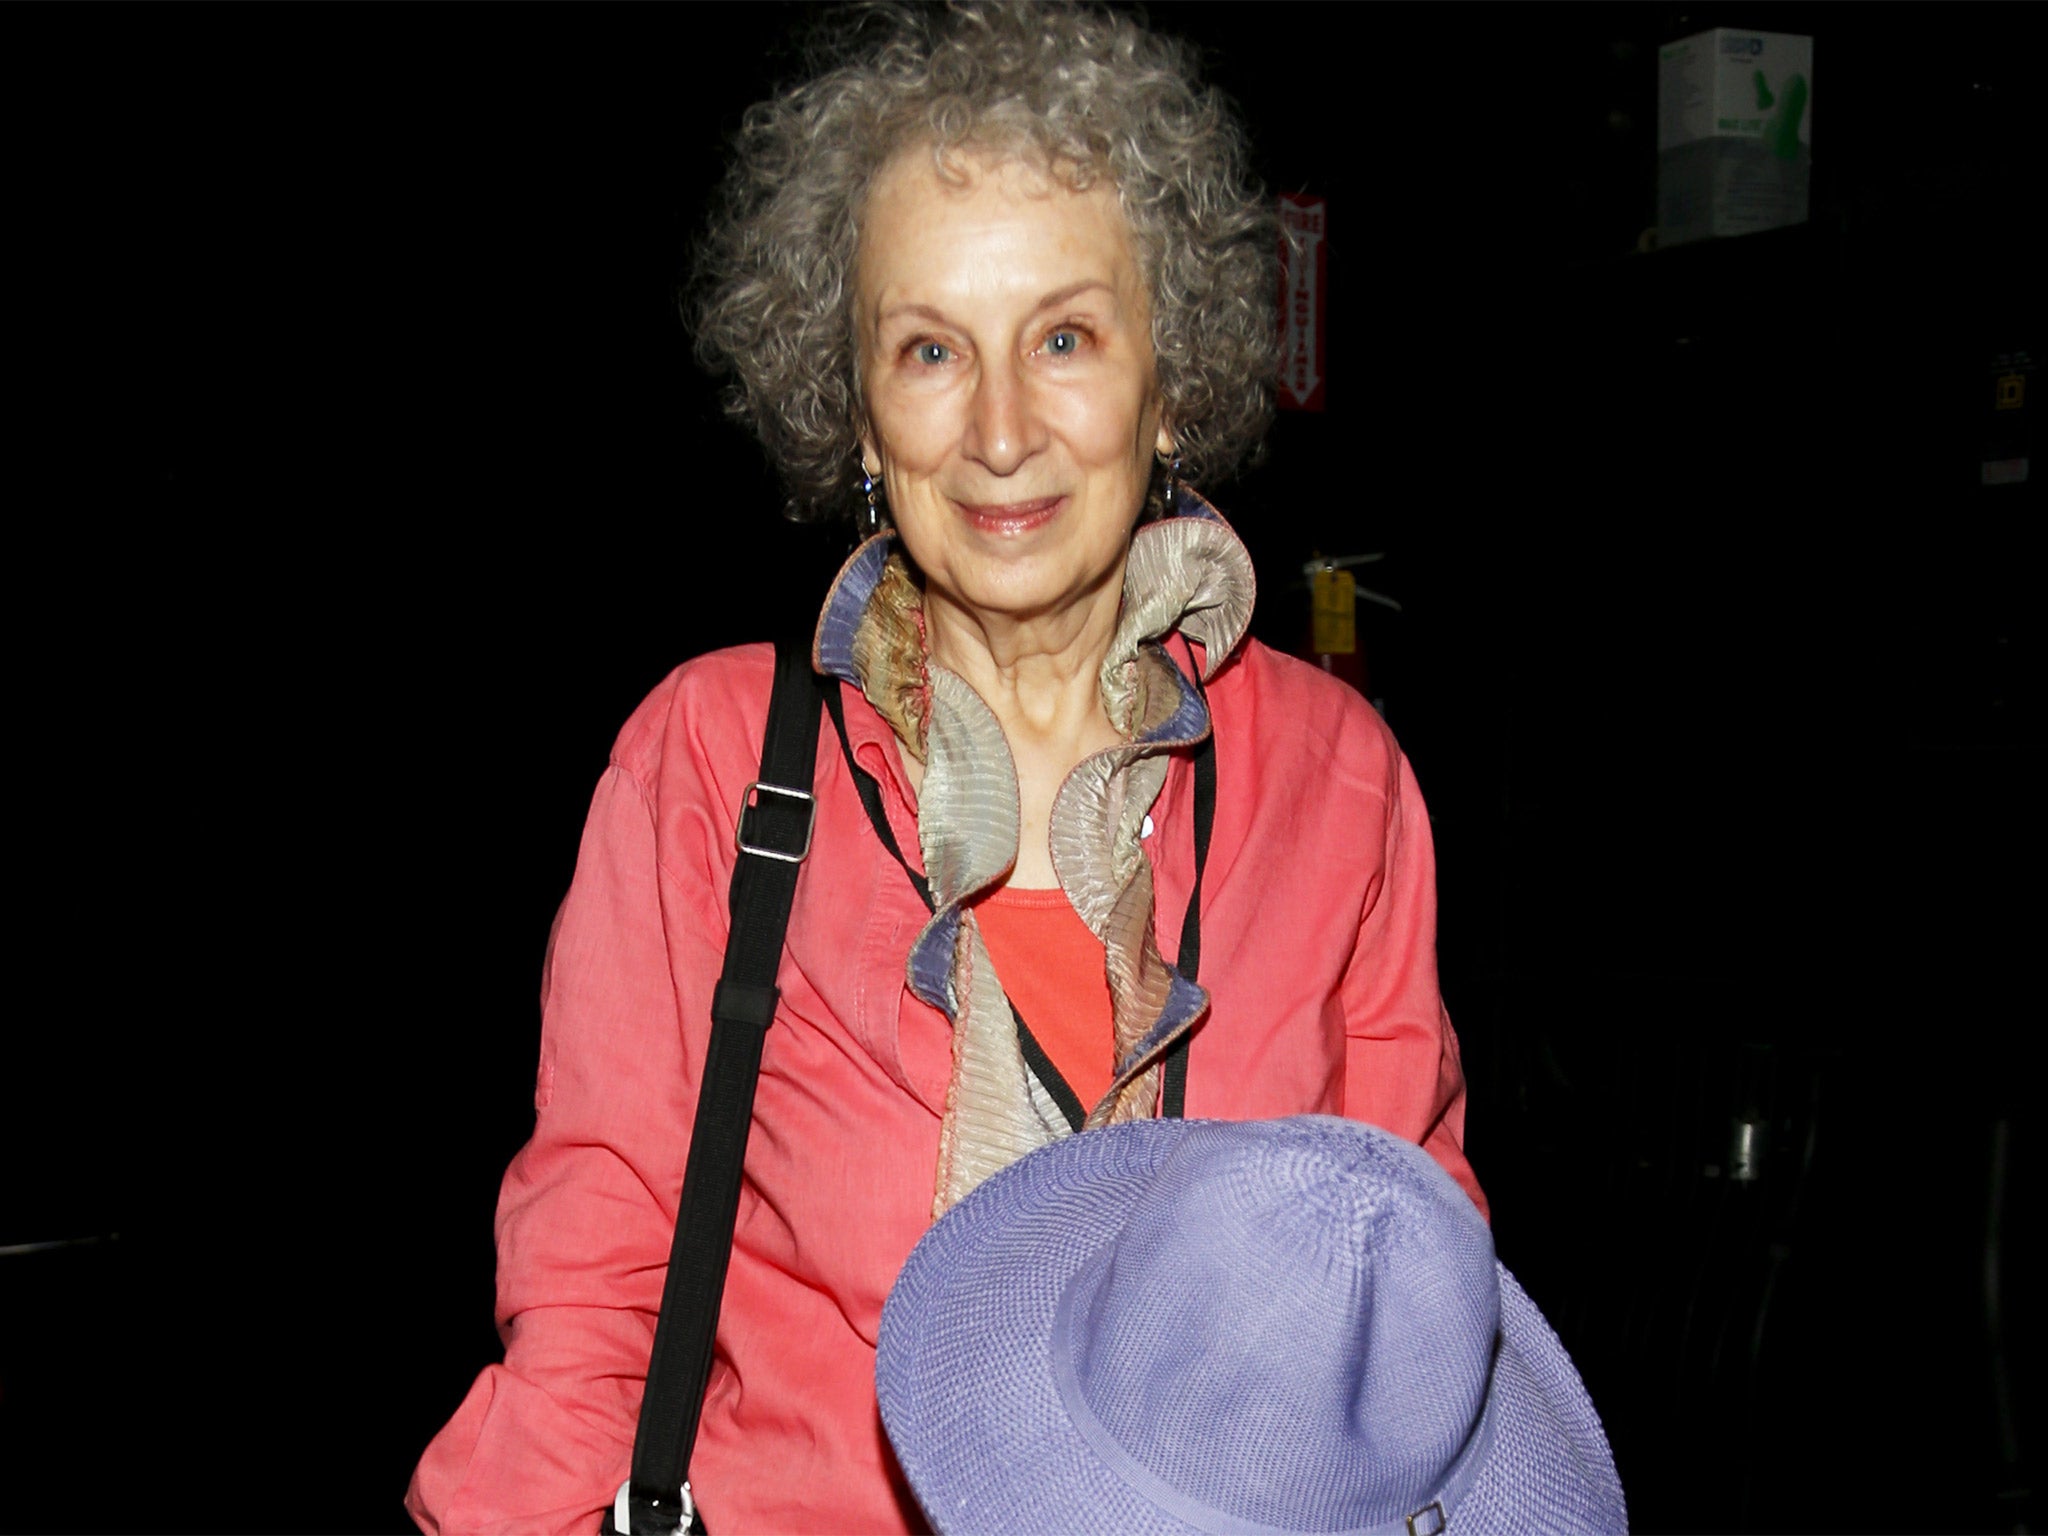 Atwood is a poet, novelist, and environmental activist (Getty)